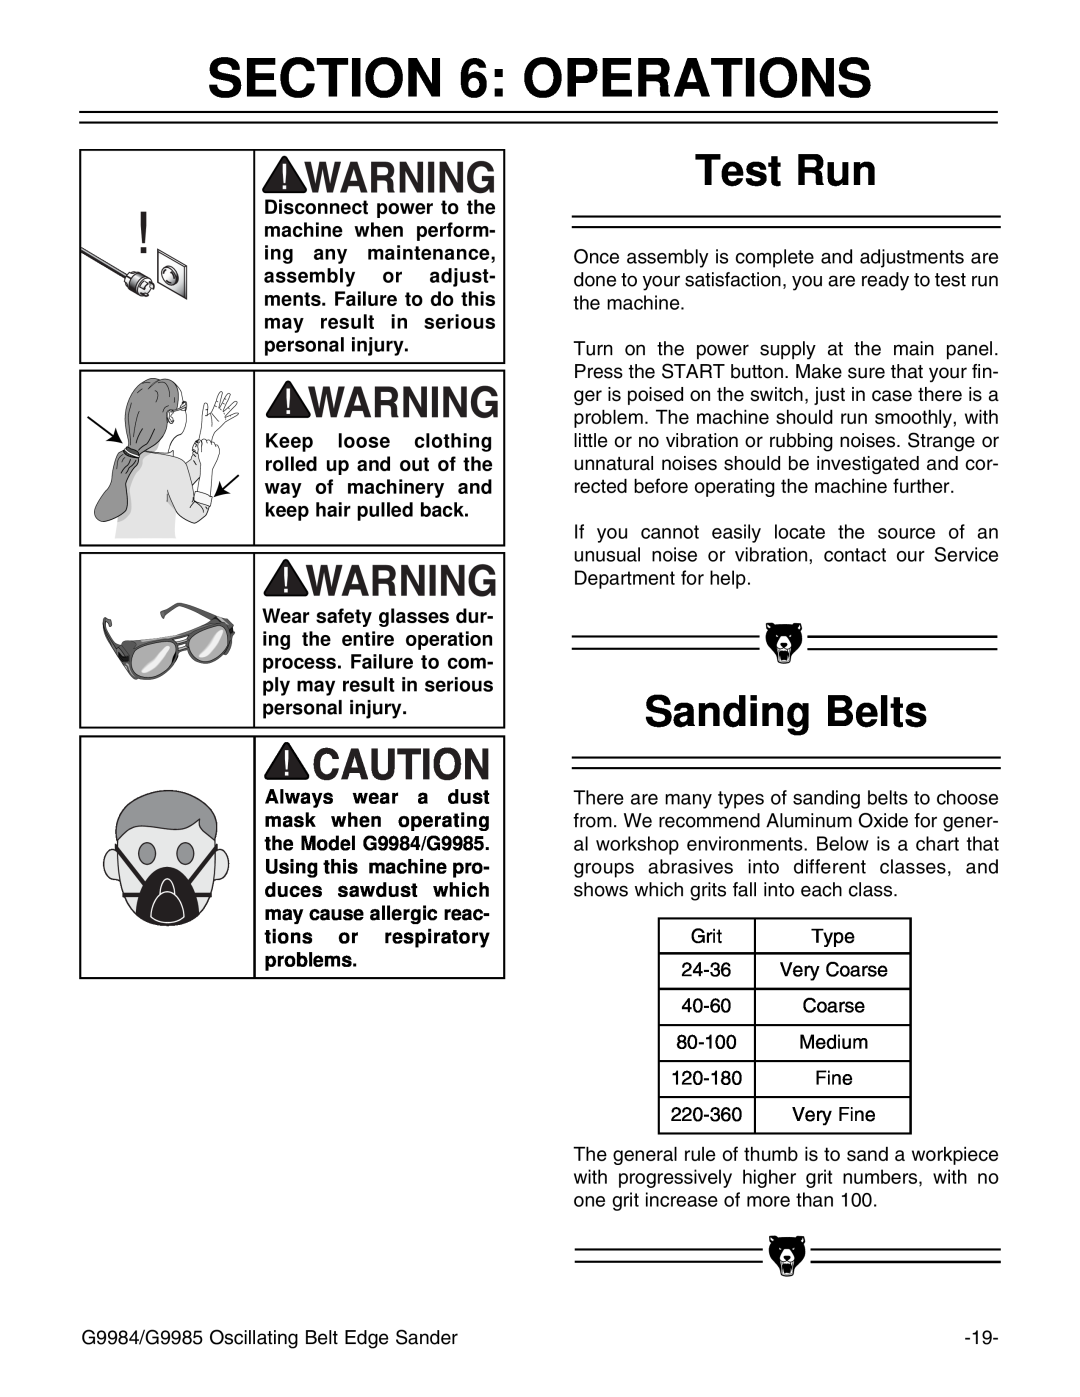 Grizzly G9985, G9984 instruction manual Operations, Test Run, Sanding Belts 